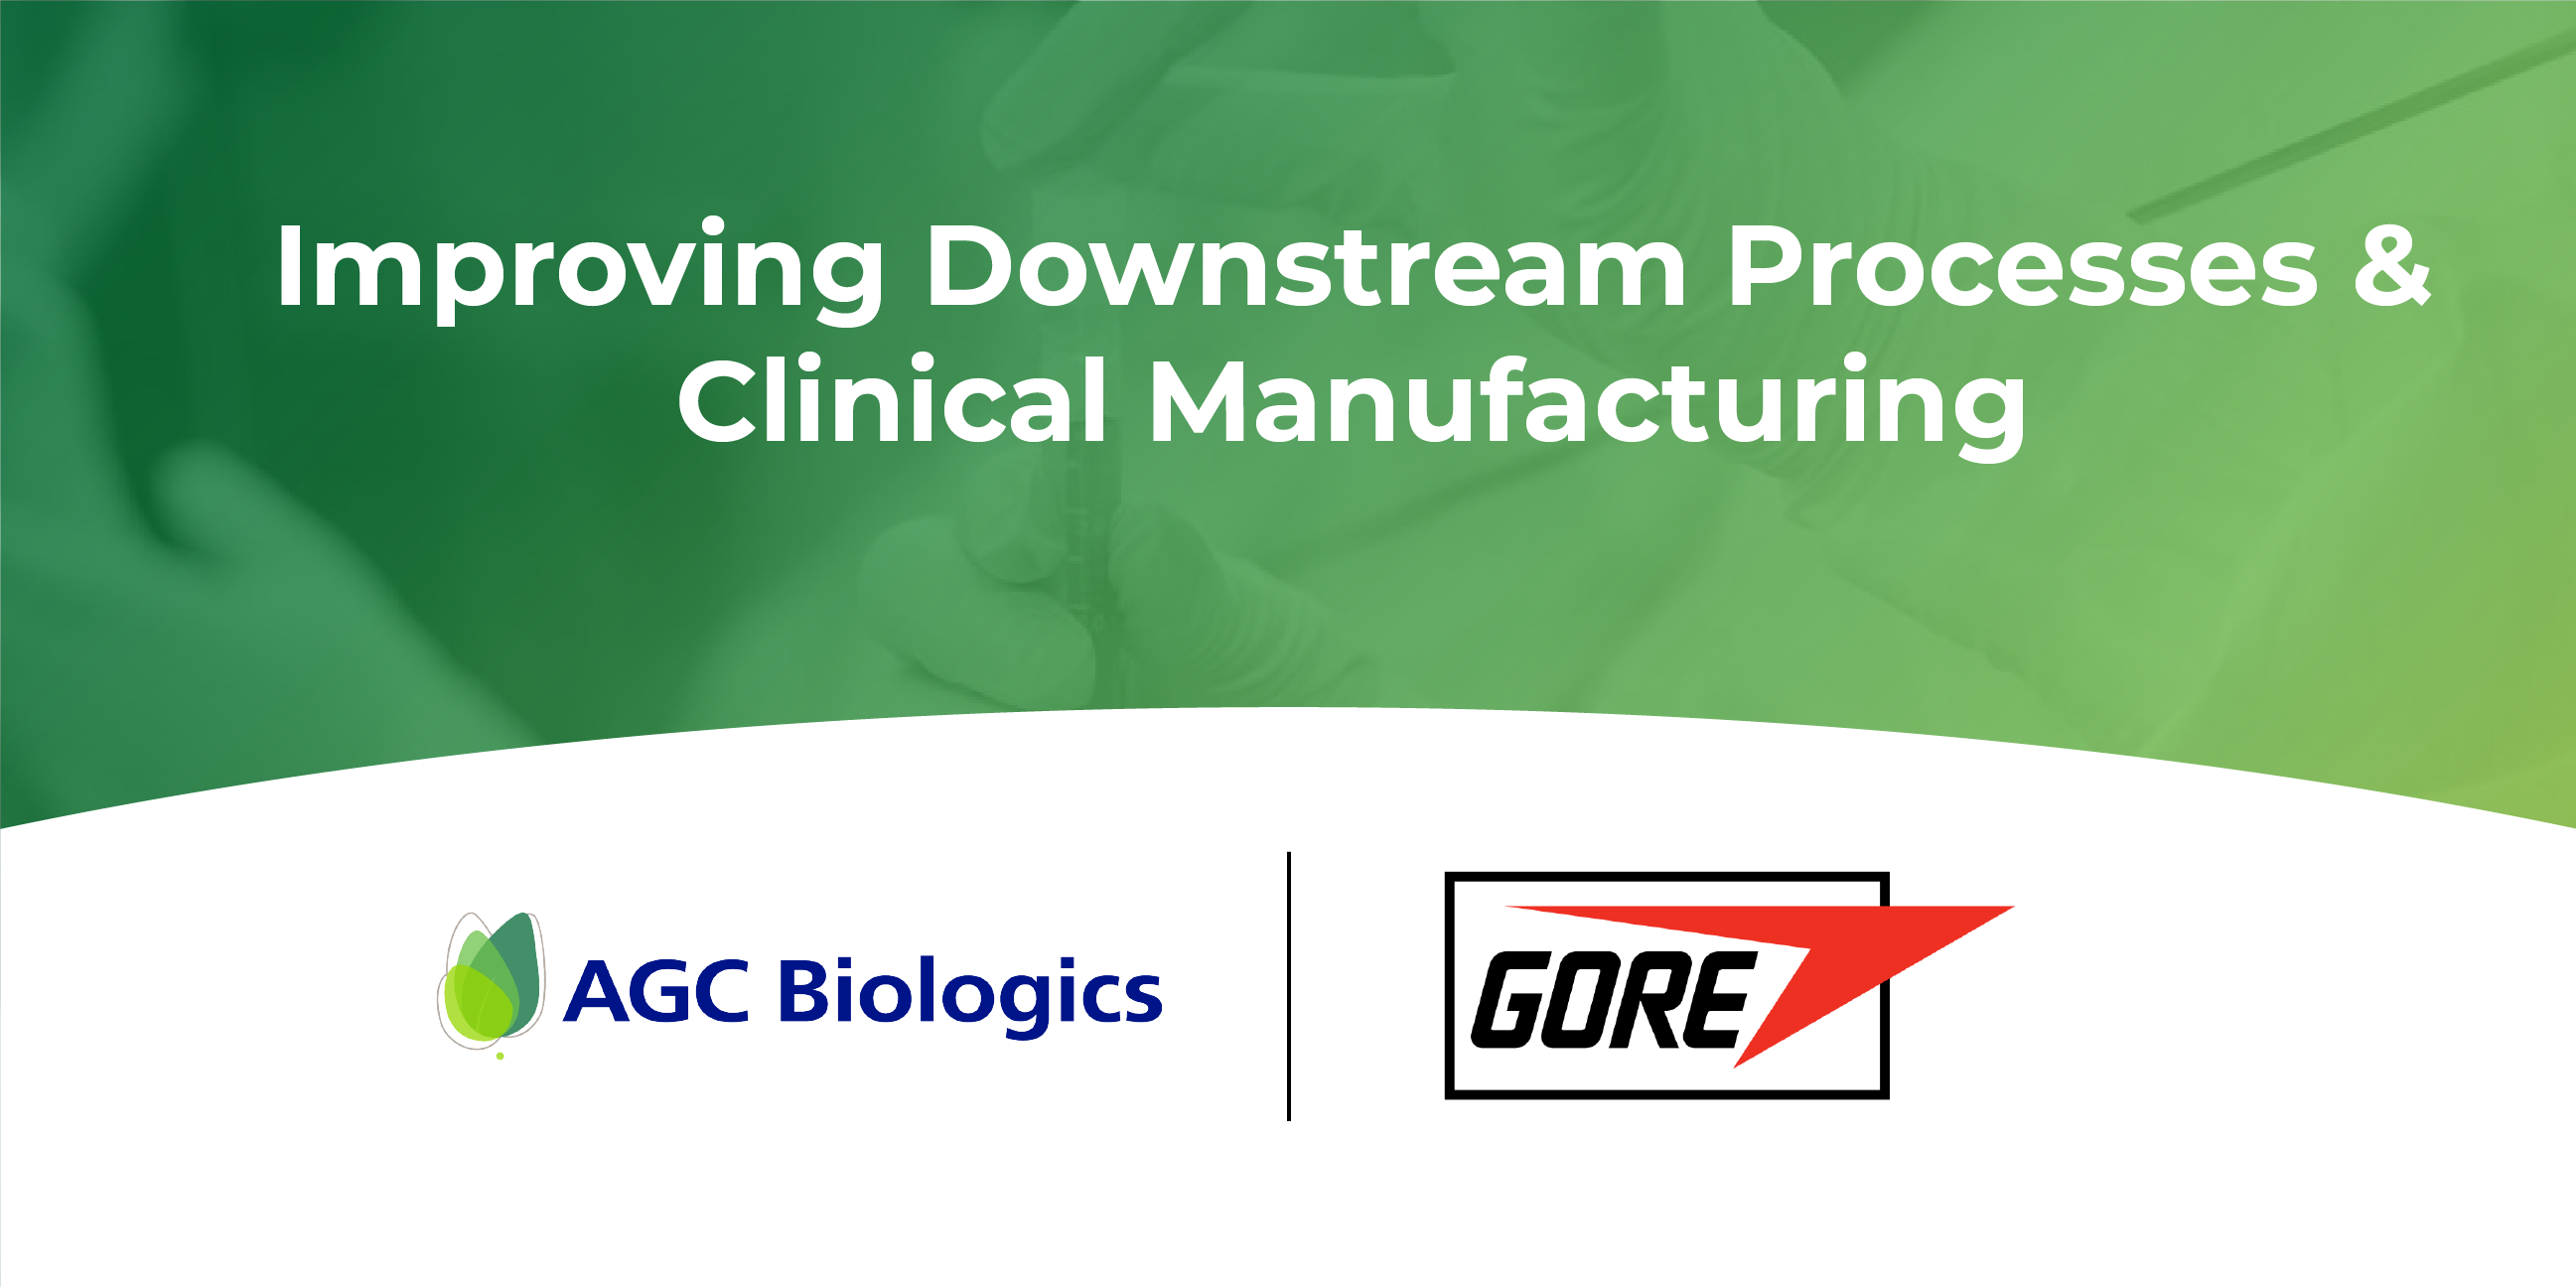 AGC Biologics and Gore Collaborate on New Protein A-based Purification Technology and Contract Manufacturing Services for Antibody Therapies